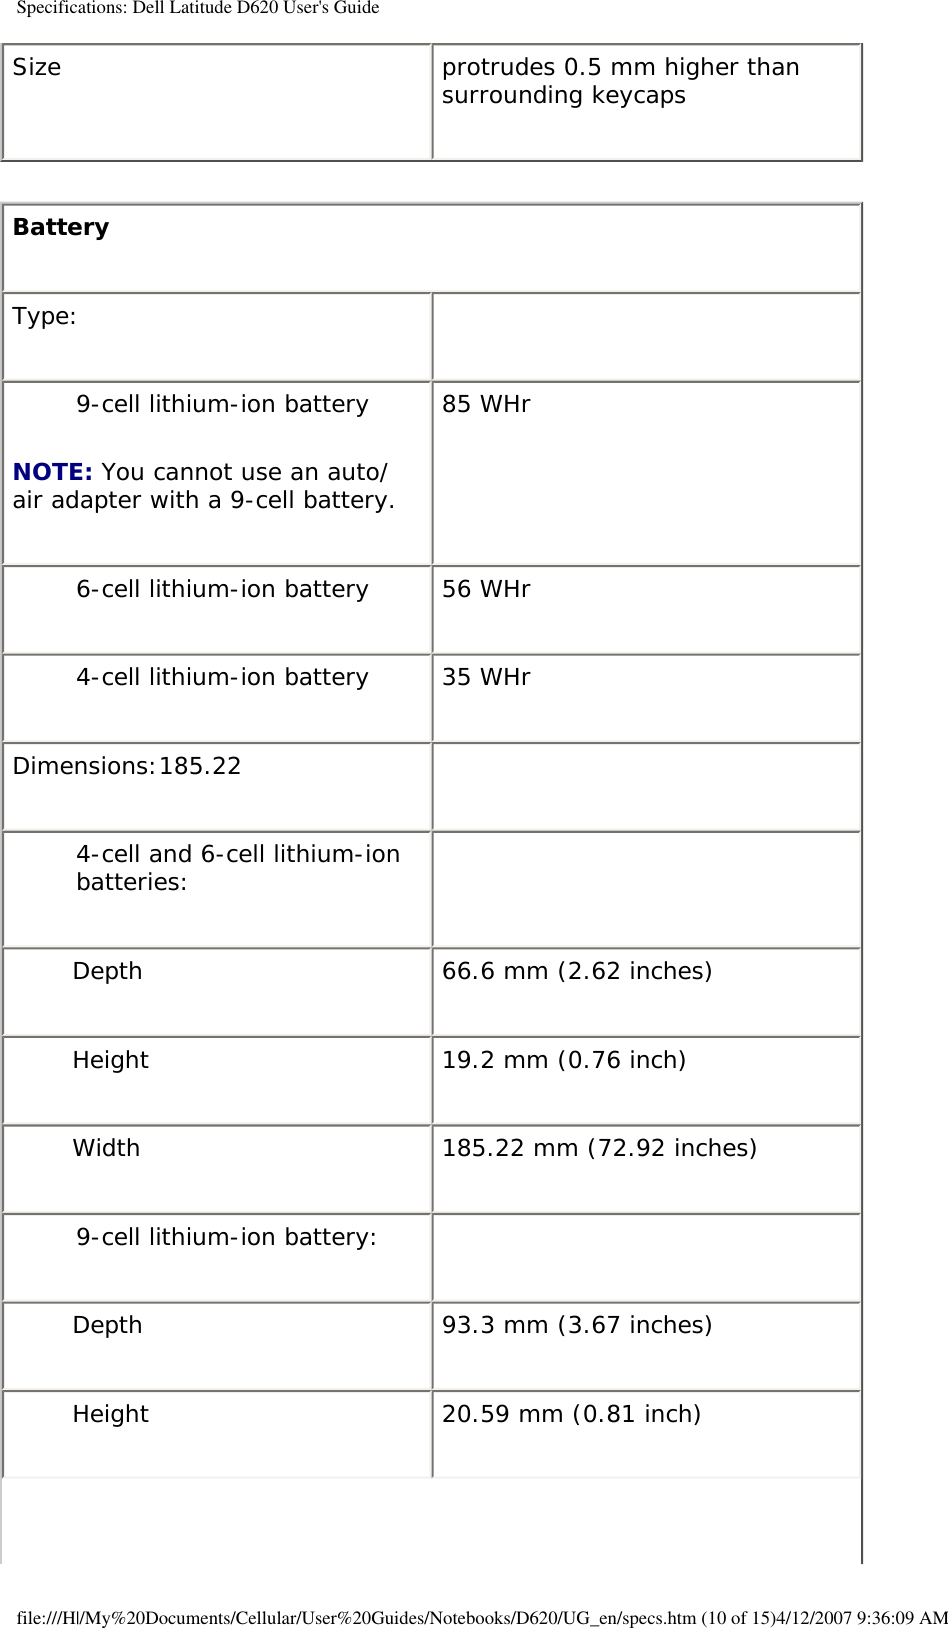 Specifications: Dell Latitude D620 User&apos;s GuideSize protrudes 0.5 mm higher than surrounding keycapsBattery Type:  9-cell lithium-ion batteryNOTE: You cannot use an auto/air adapter with a 9-cell battery.85 WHr 6-cell lithium-ion battery 56 WHr4-cell lithium-ion battery 35 WHrDimensions:185.22  4-cell and 6-cell lithium-ion batteries:  Depth 66.6 mm (2.62 inches)Height 19.2 mm (0.76 inch)Width 185.22 mm (72.92 inches)9-cell lithium-ion battery:  Depth 93.3 mm (3.67 inches)Height 20.59 mm (0.81 inch)file:///H|/My%20Documents/Cellular/User%20Guides/Notebooks/D620/UG_en/specs.htm (10 of 15)4/12/2007 9:36:09 AM